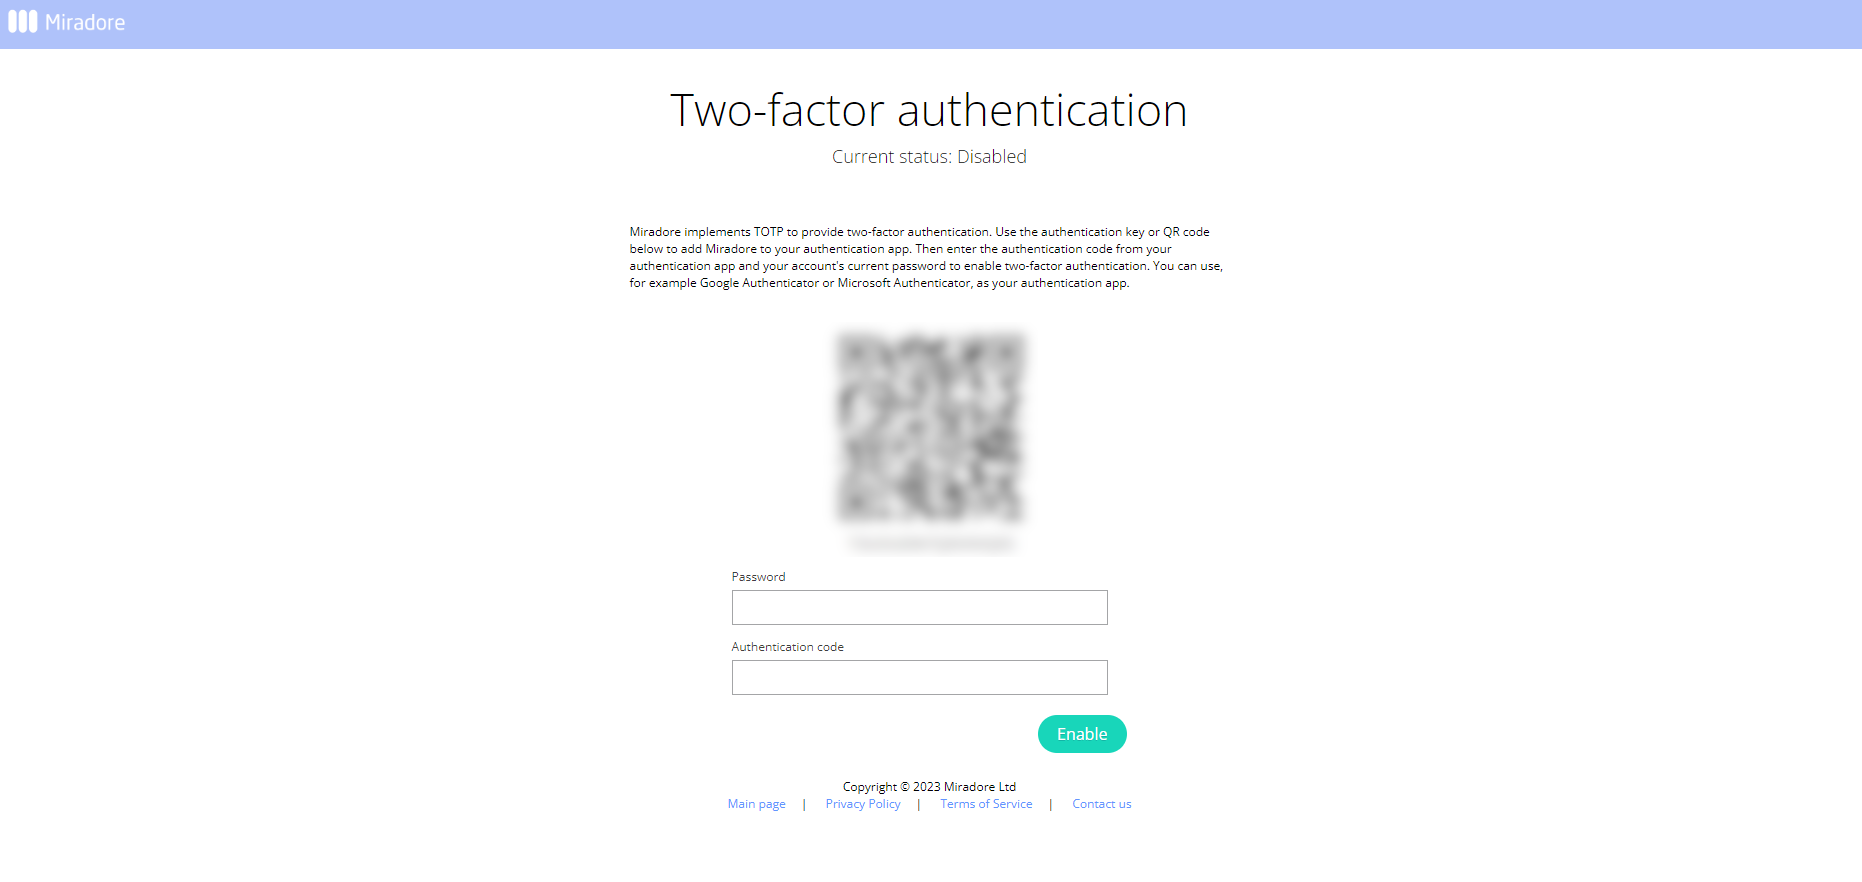 Enabling two-factor authentication in Miradore.